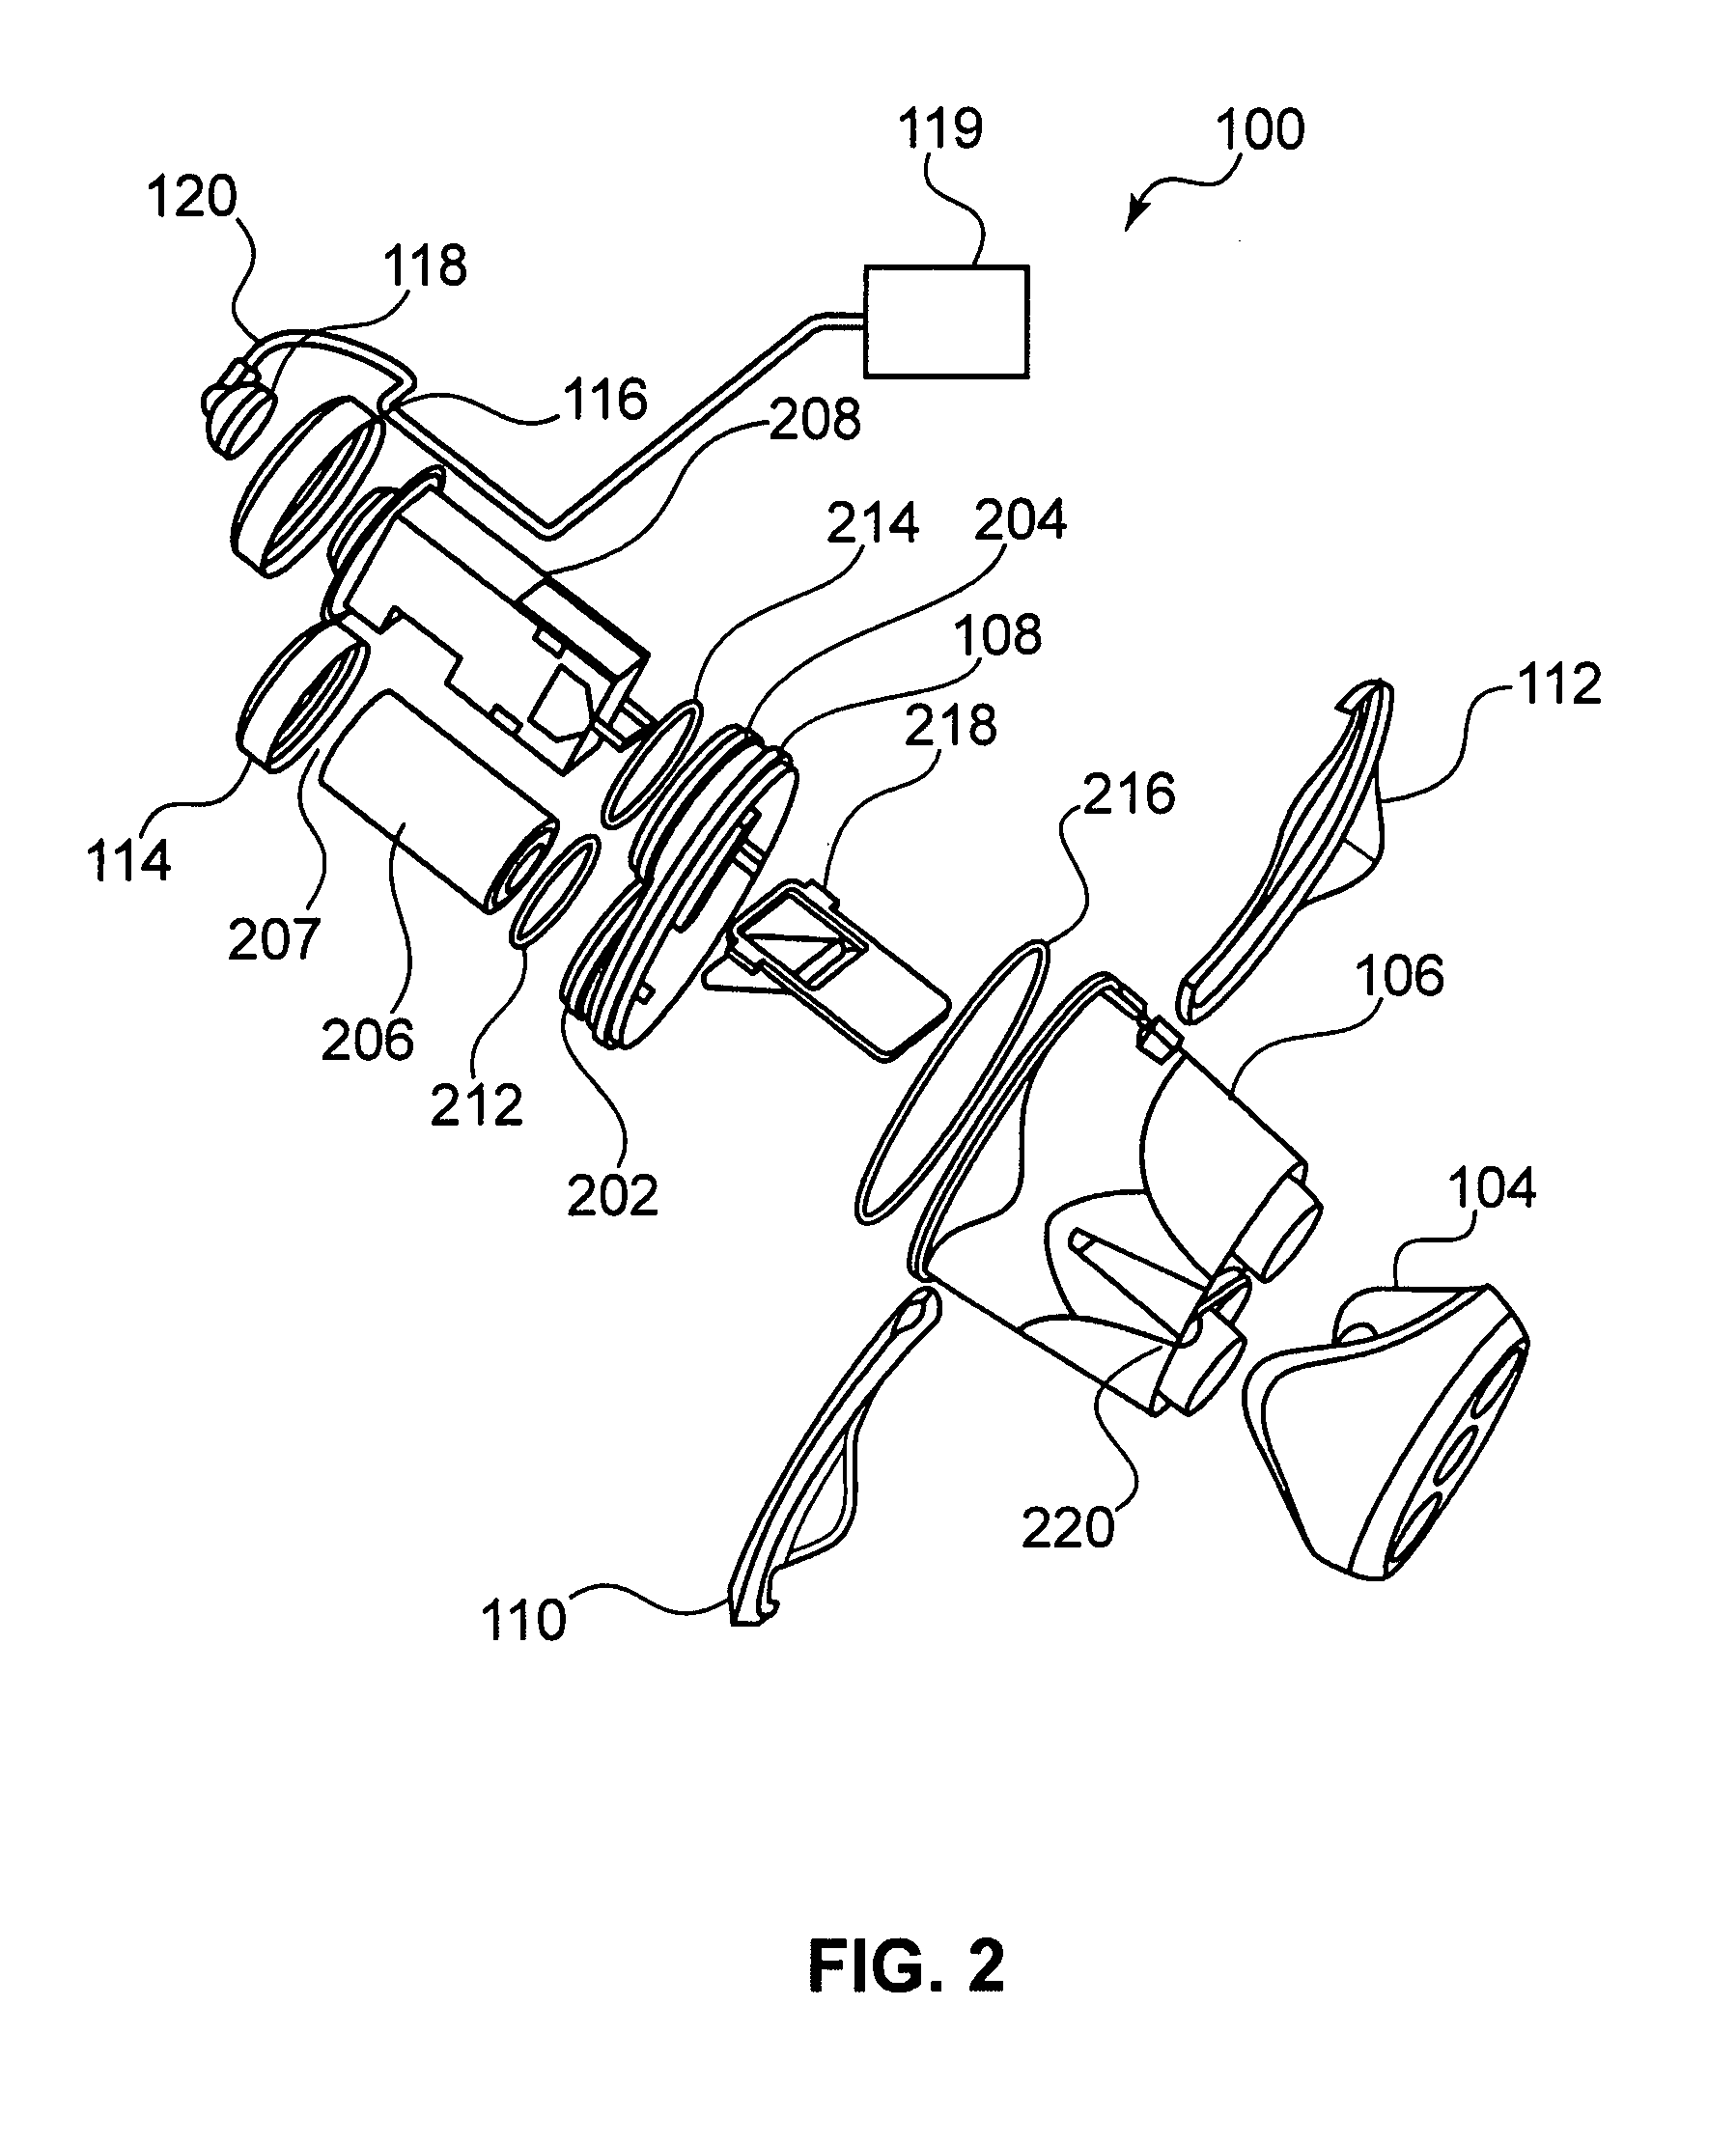 Apparatus for purifying water